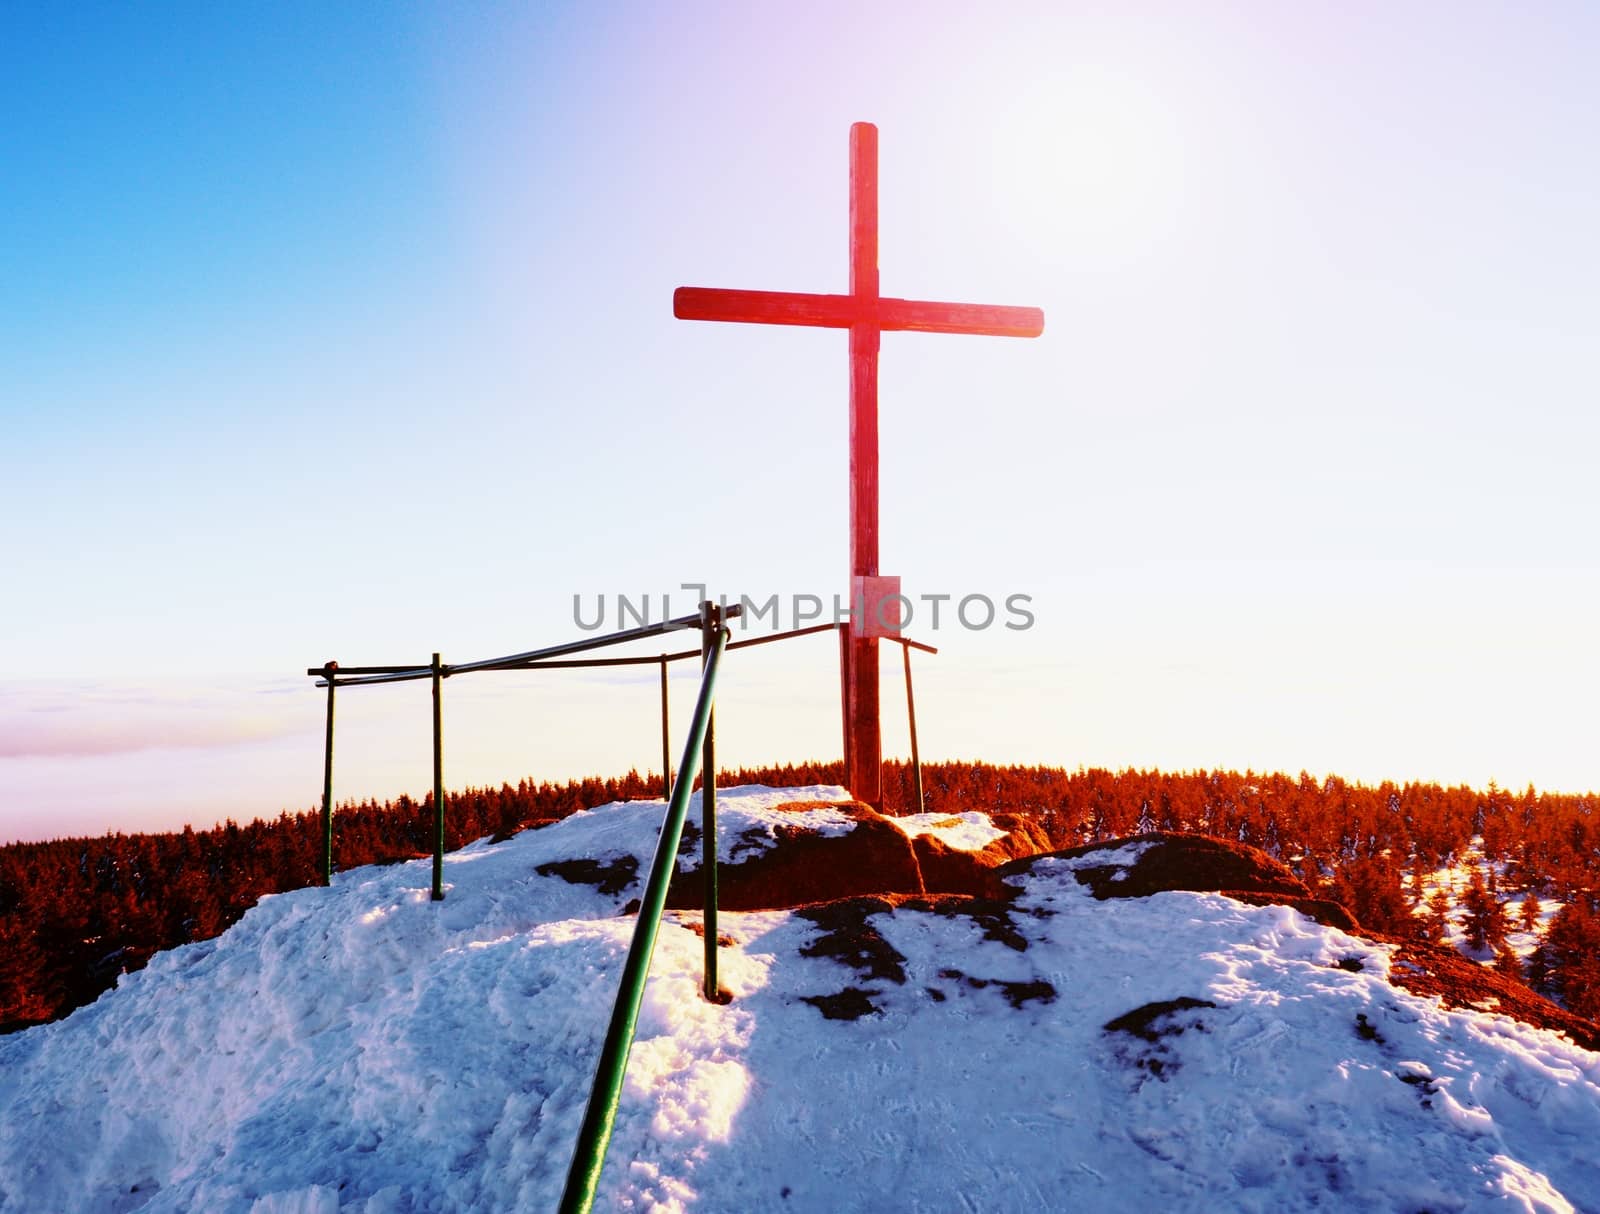 Modest wooden cross on rocky summit. Memory of victims by rdonar2